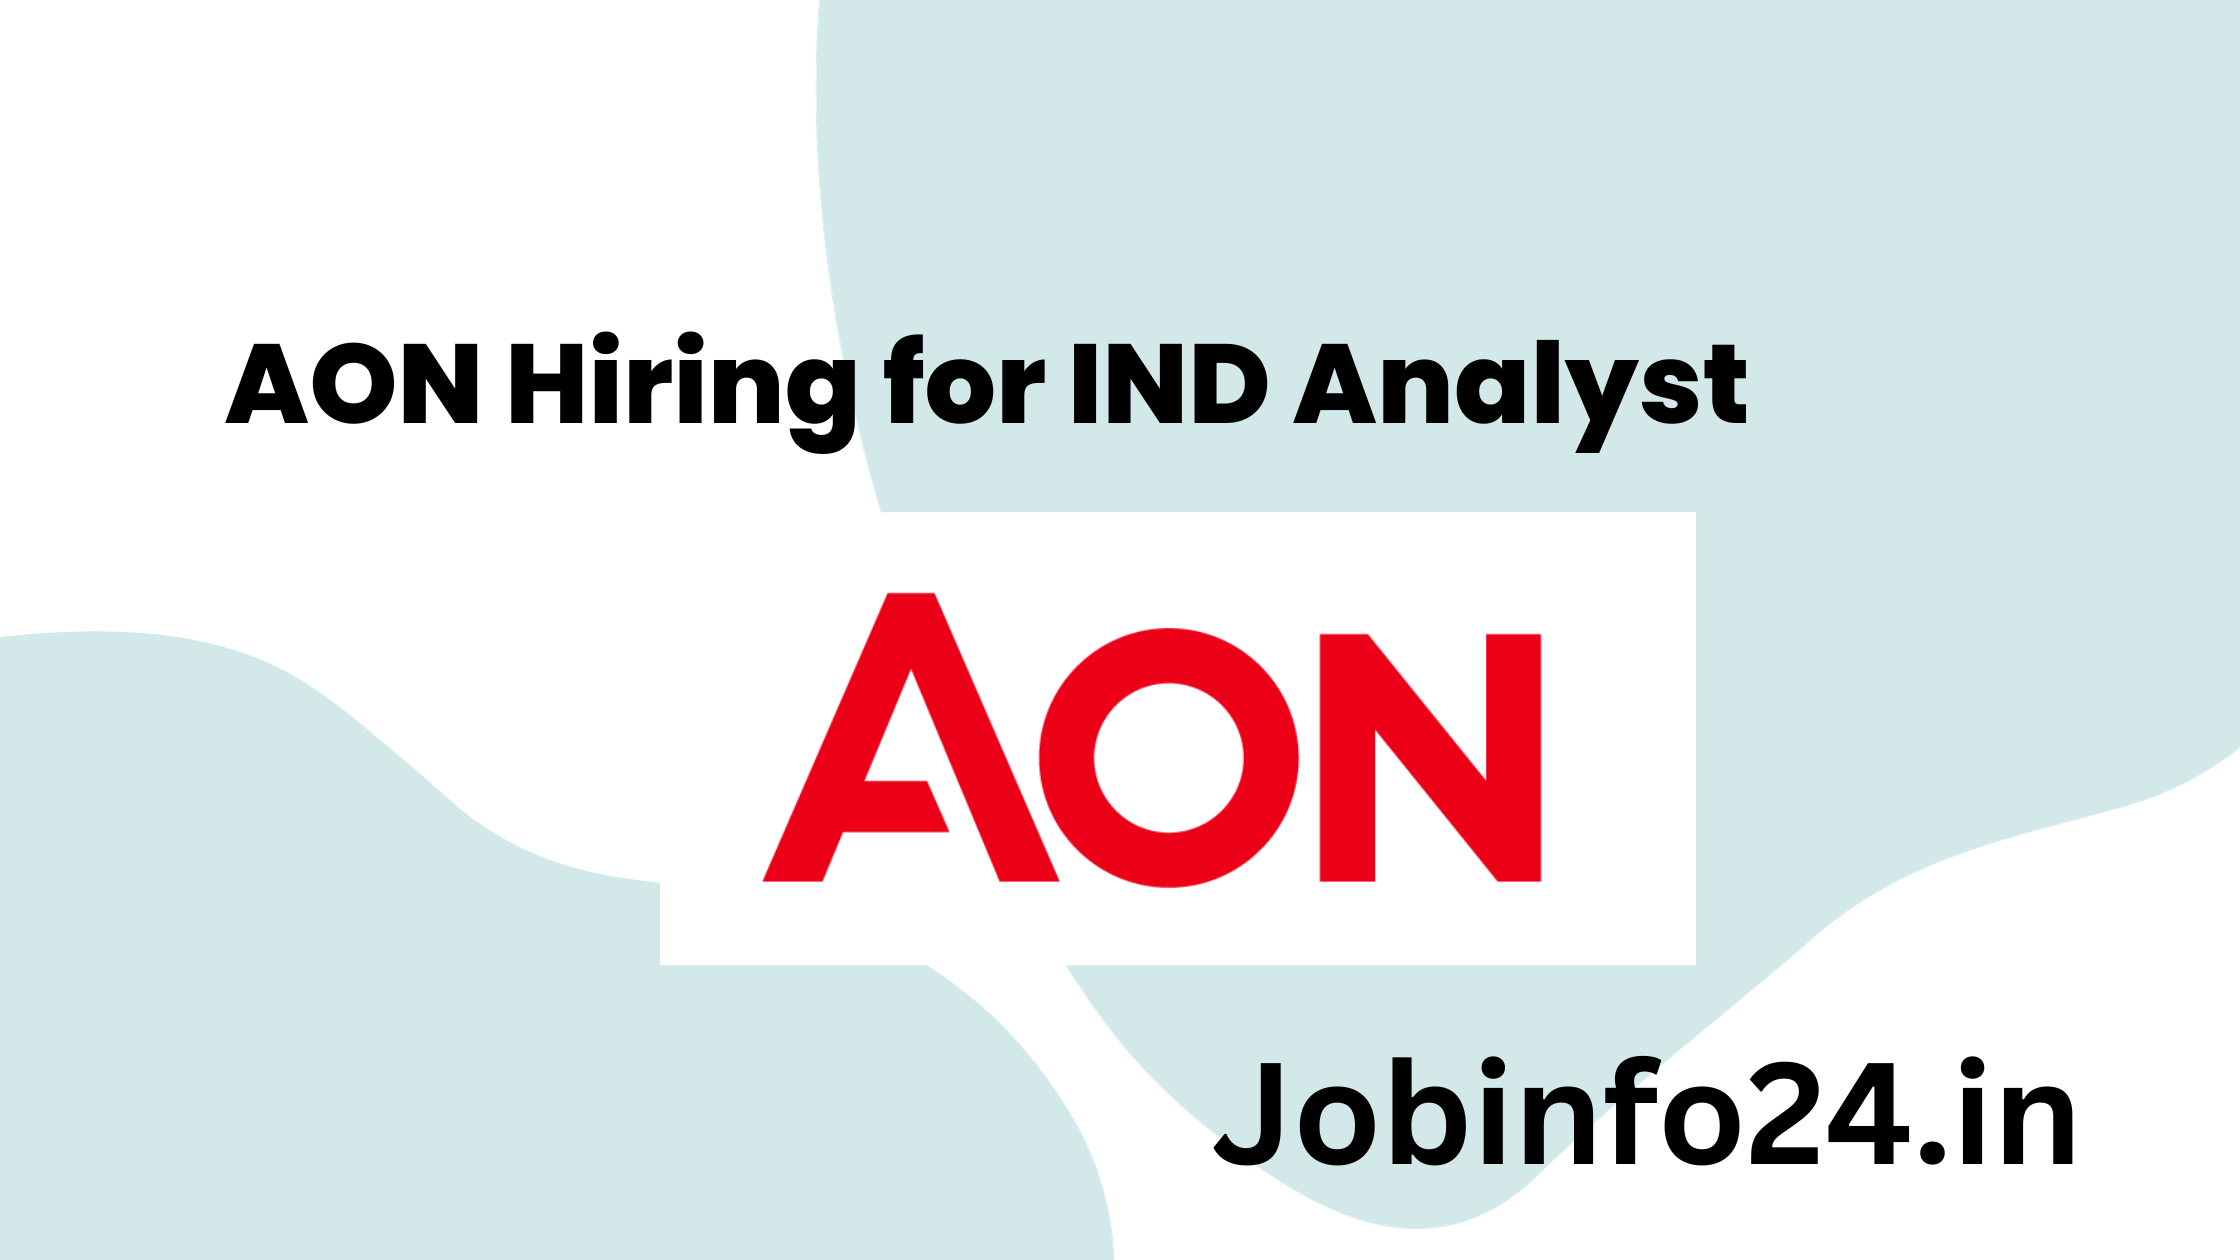 AON Hiring for IND Analyst